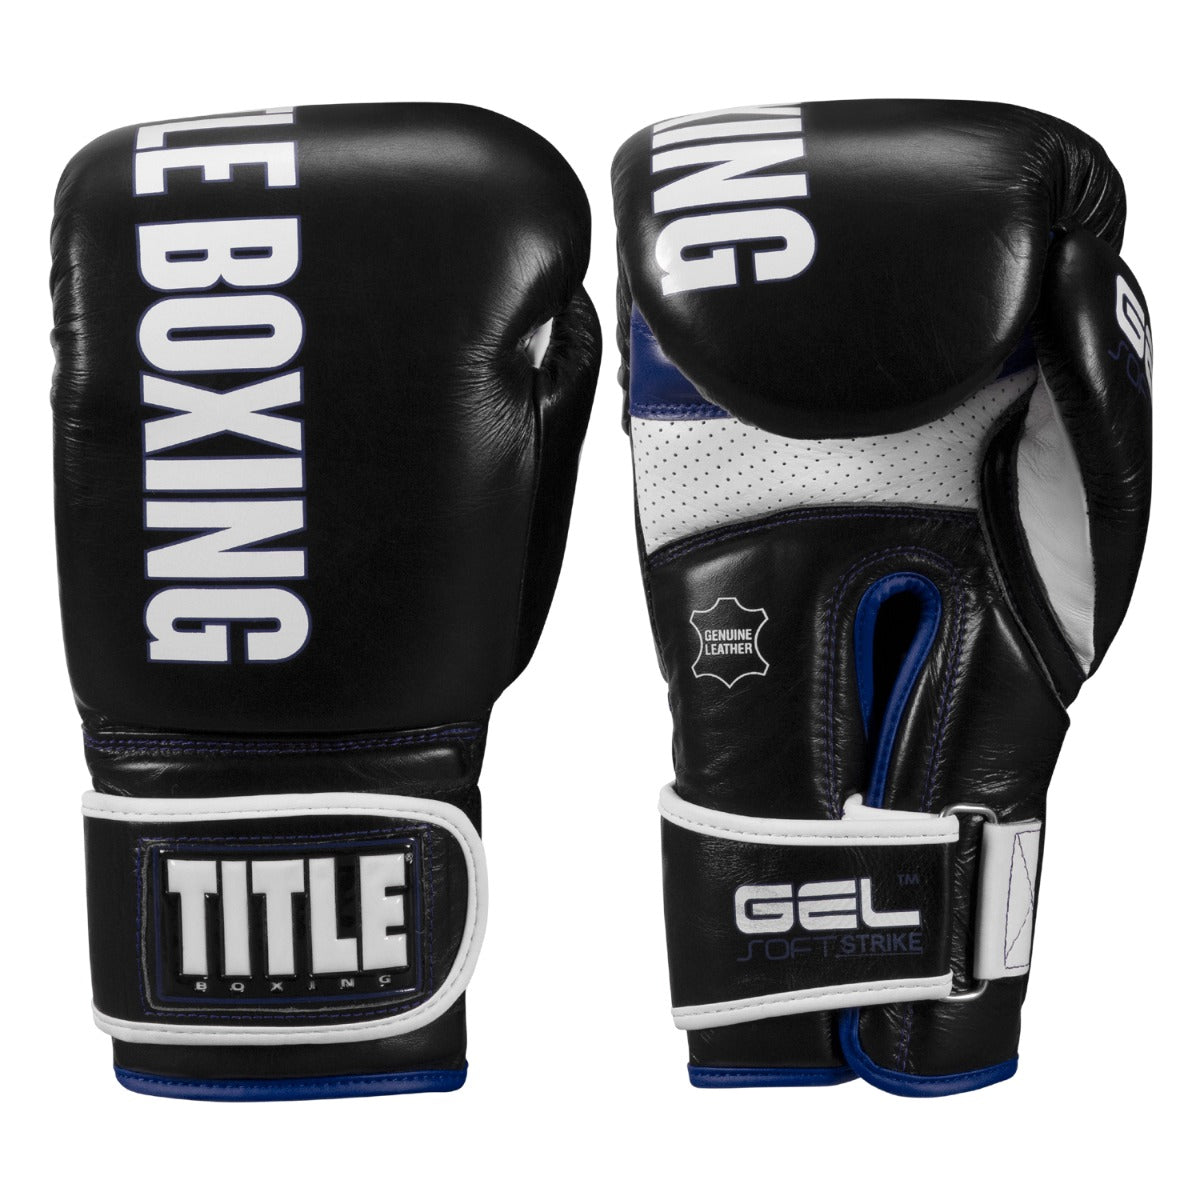 Title Champ Boxing Gloves Punch Bag Gym Punching Training Mitts Size S/M 